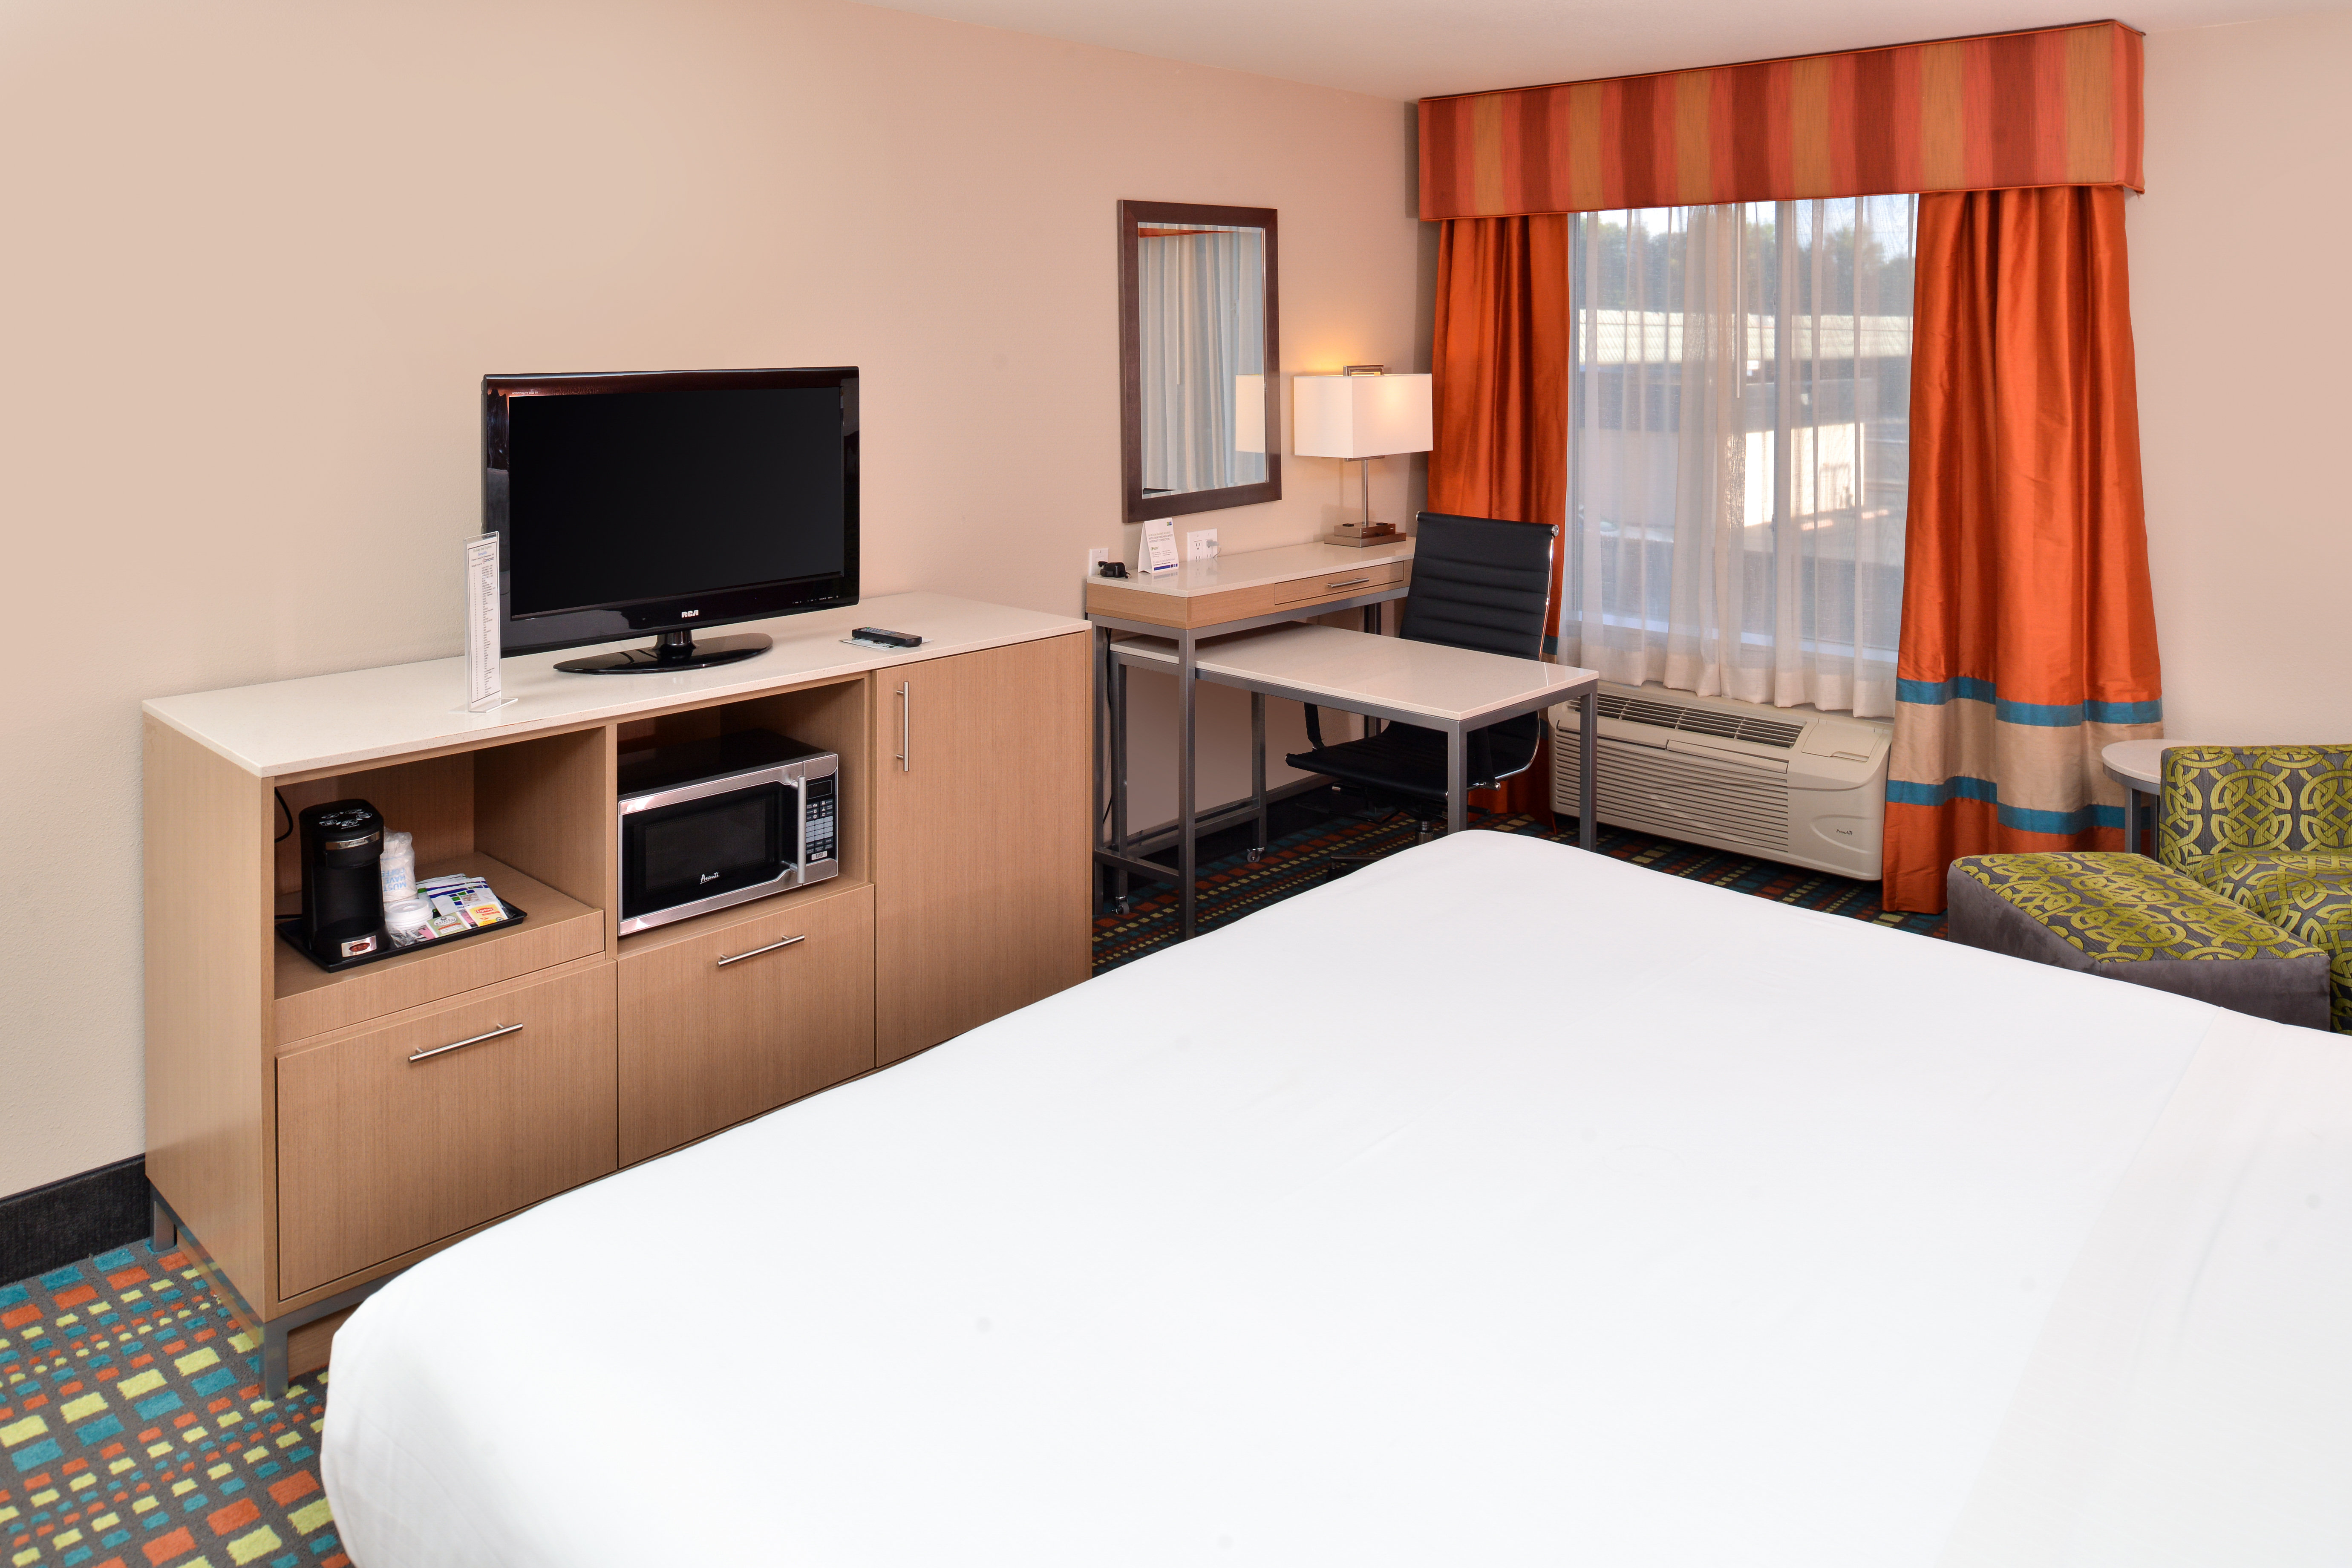 Enjoy extra space to work or sit & watch TV in our king bed room.